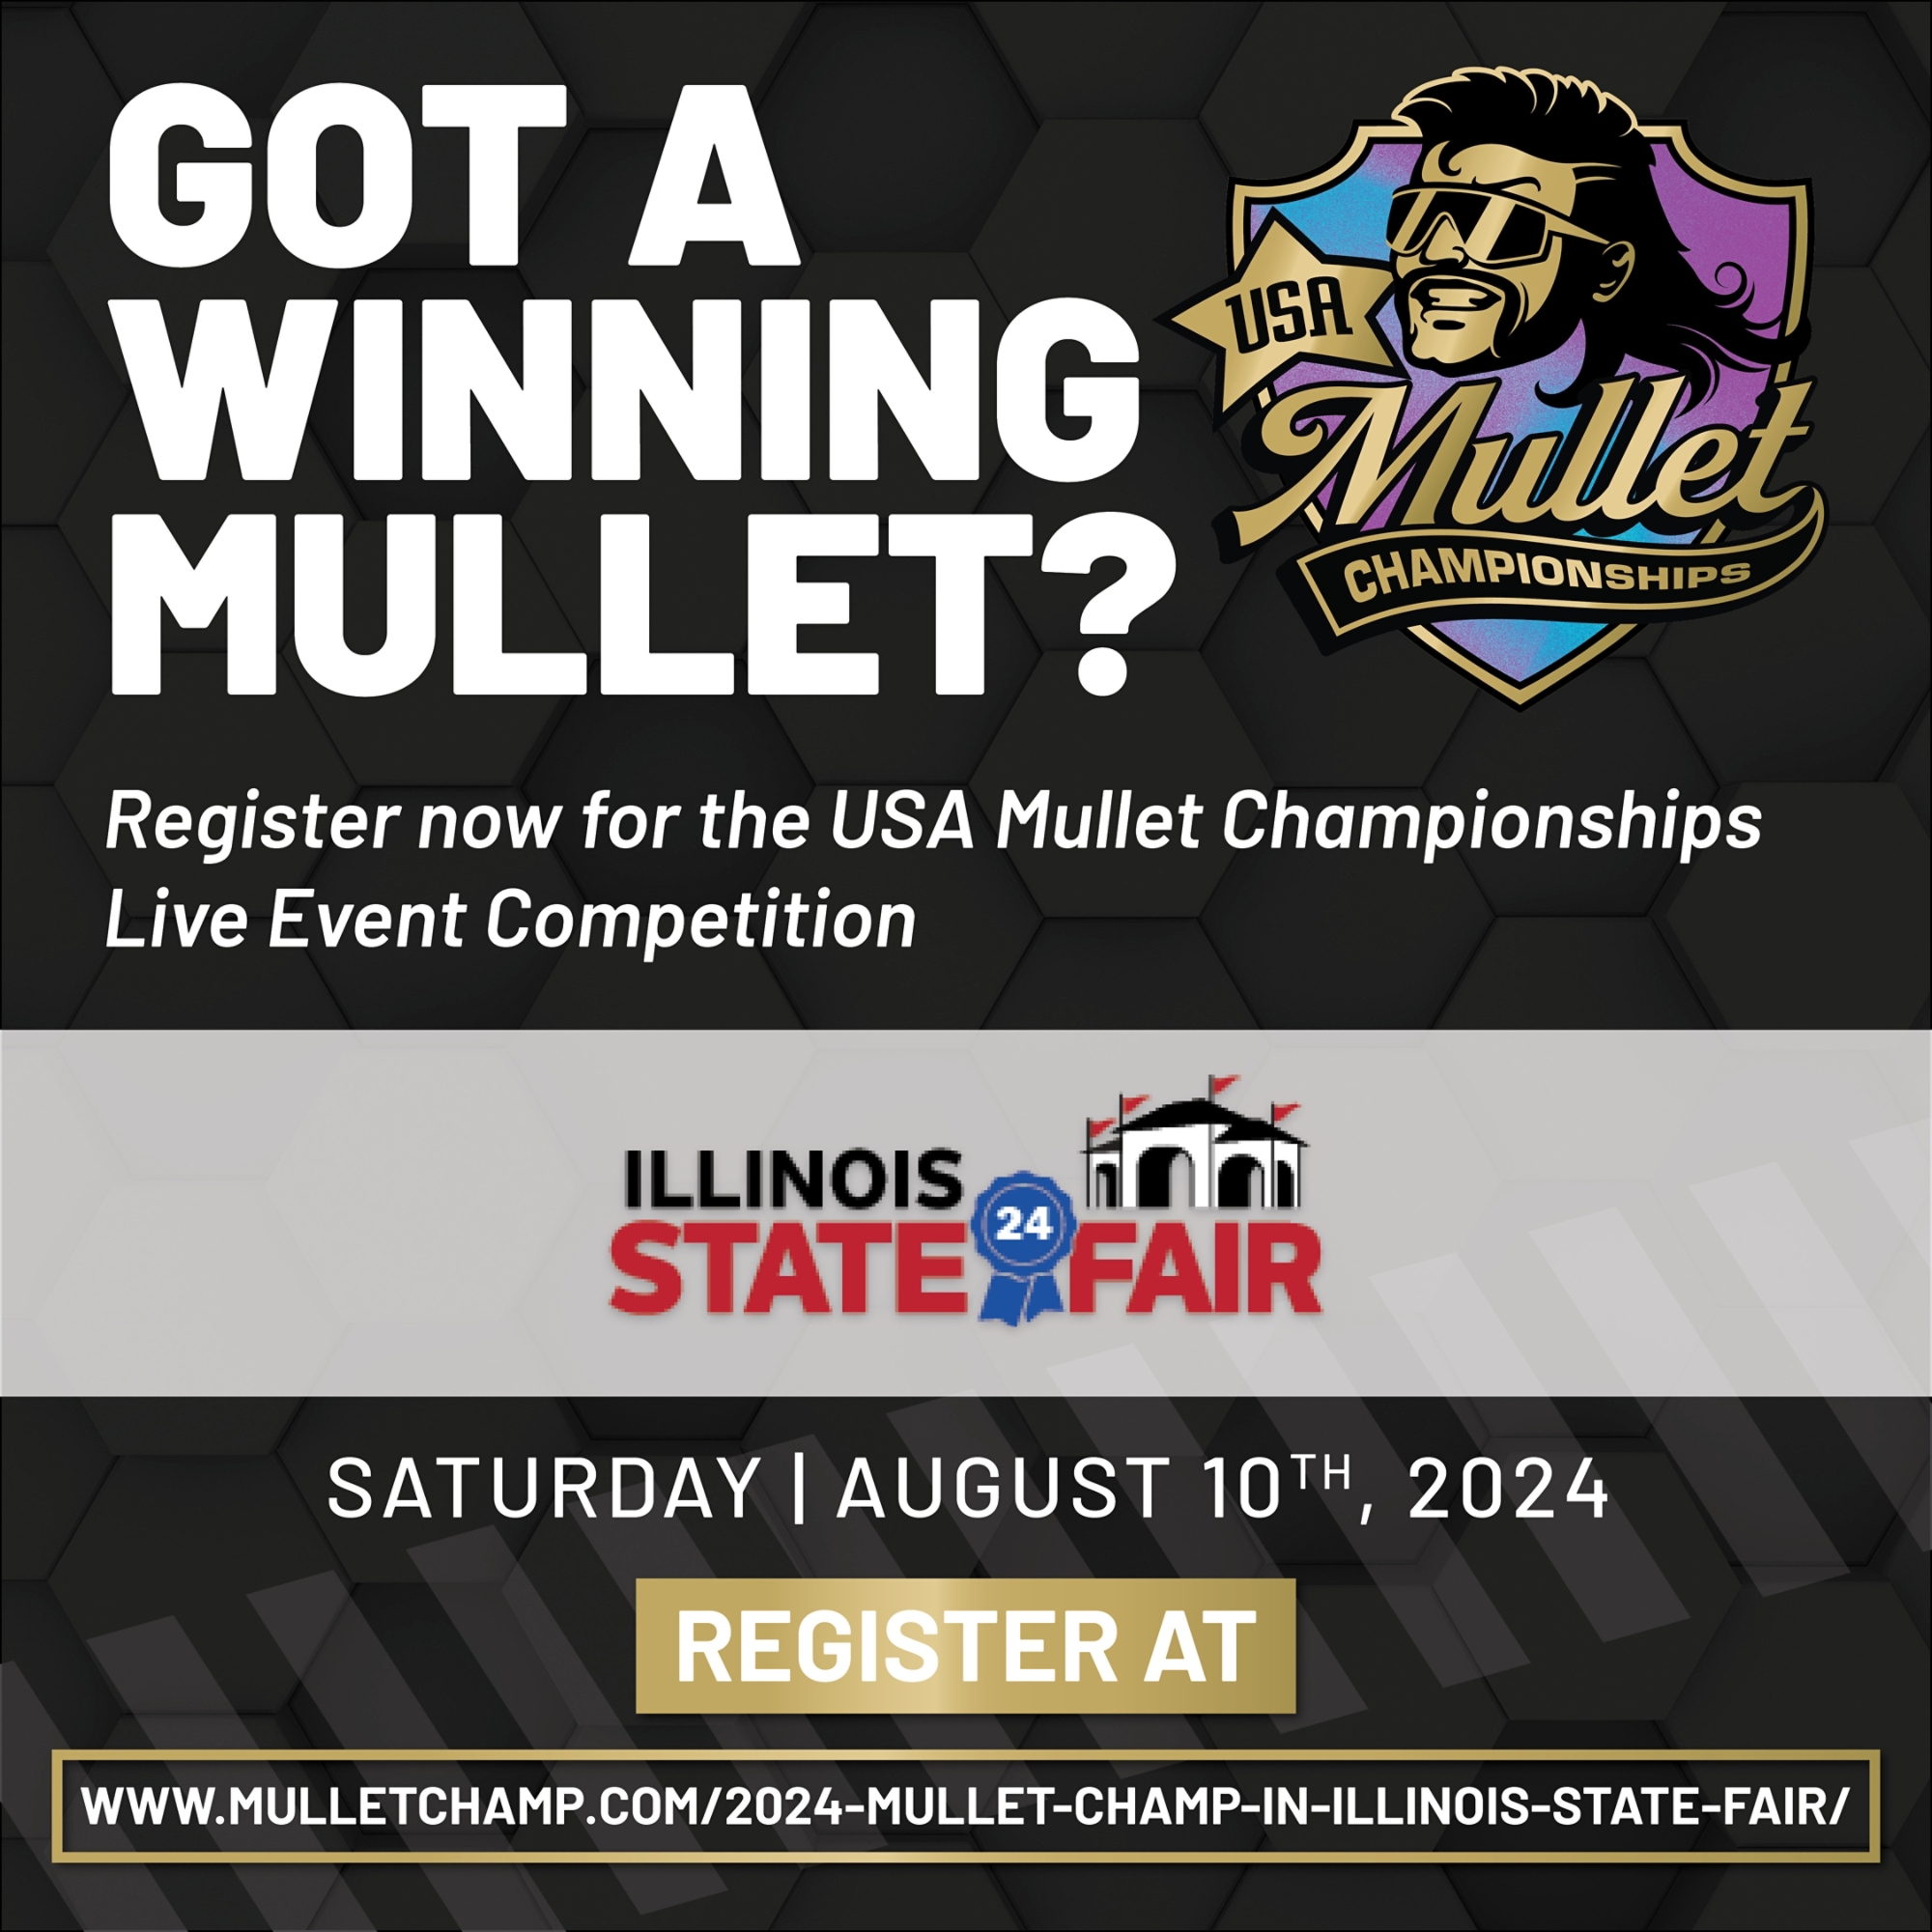 Got a winning Mullet?  Register  now for the USA Mullet Championships Live Event Competition.  Illinois State Fair, Saturday, August 10, 2024.  Click to register